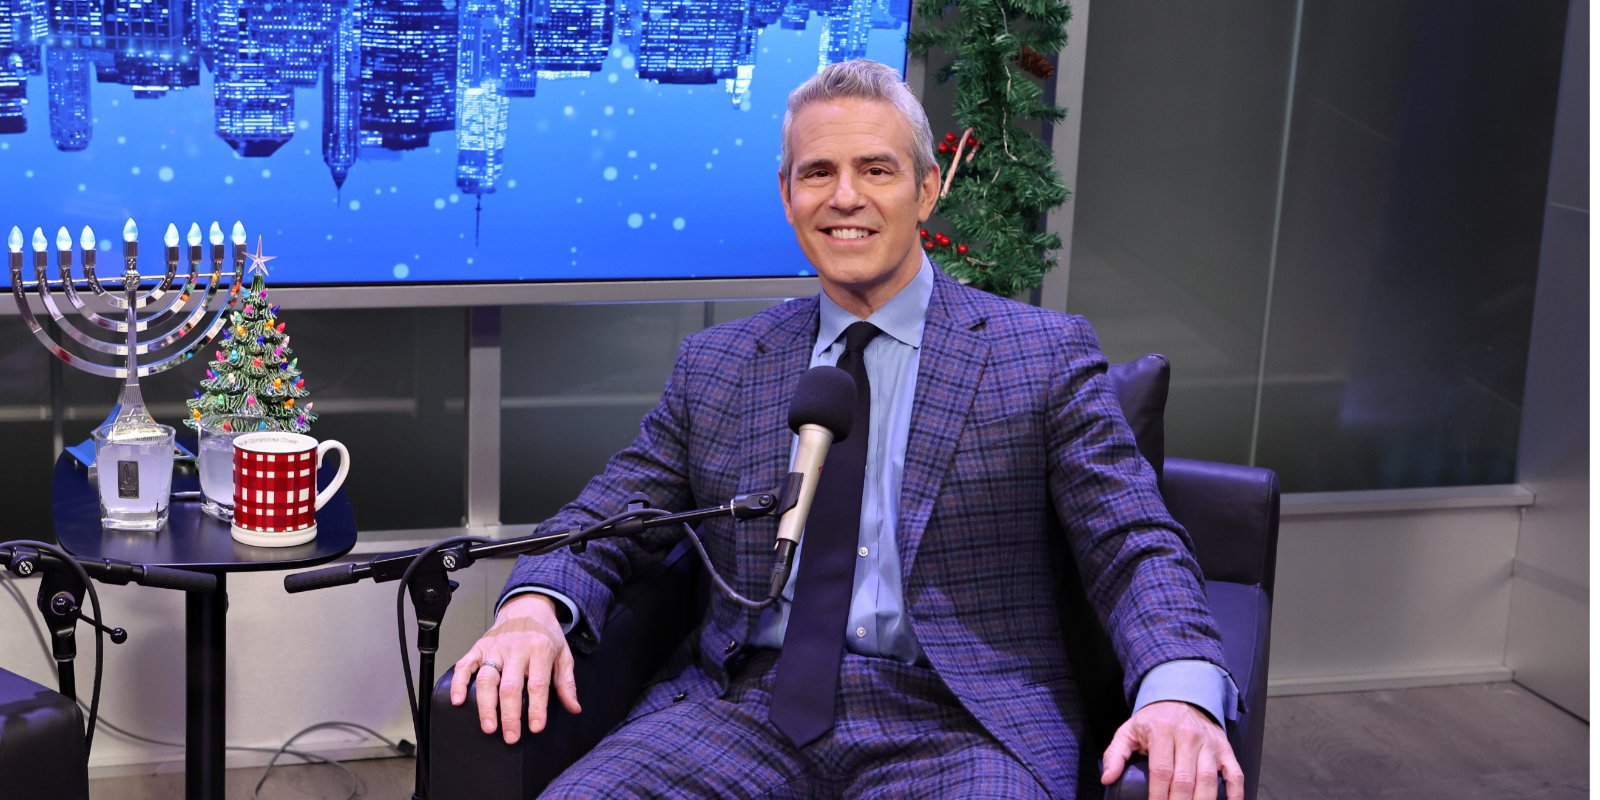 Andy Cohen takes part in SiriusXM's Radio Andy Annual Holiday Hangout at SiriusXM Studios on December 15, 2022, in New York City.